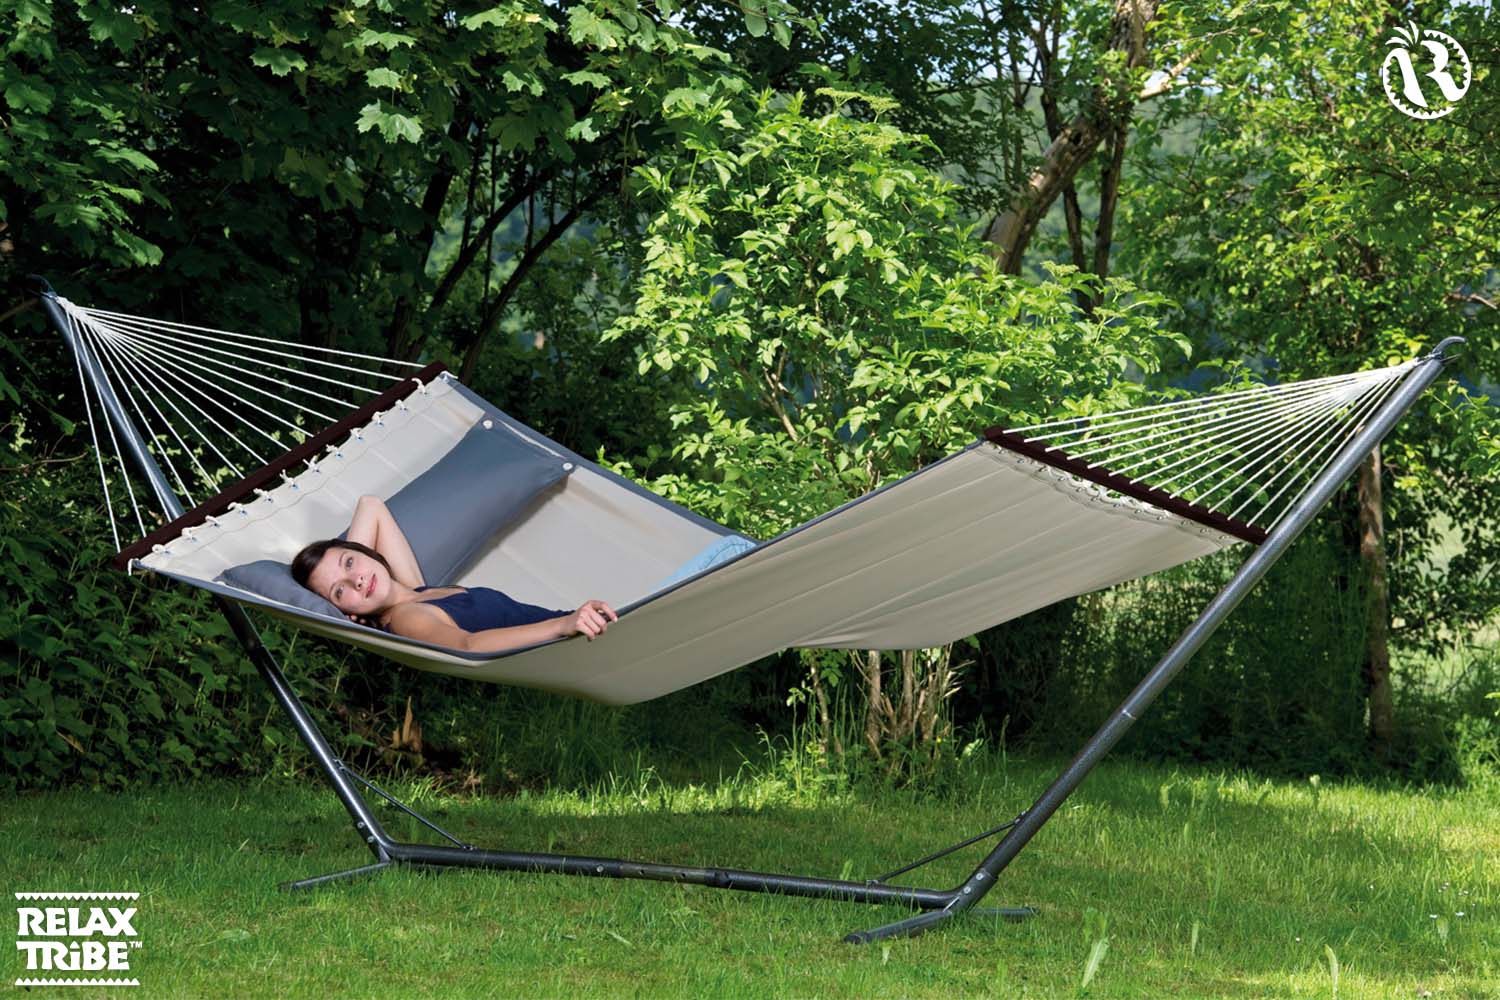 sumo-grande-xl-steel-stand-for-hammock-length-330-360cm-max-200kg-home-garden-weatherproof-silver-and-american-dream-sand